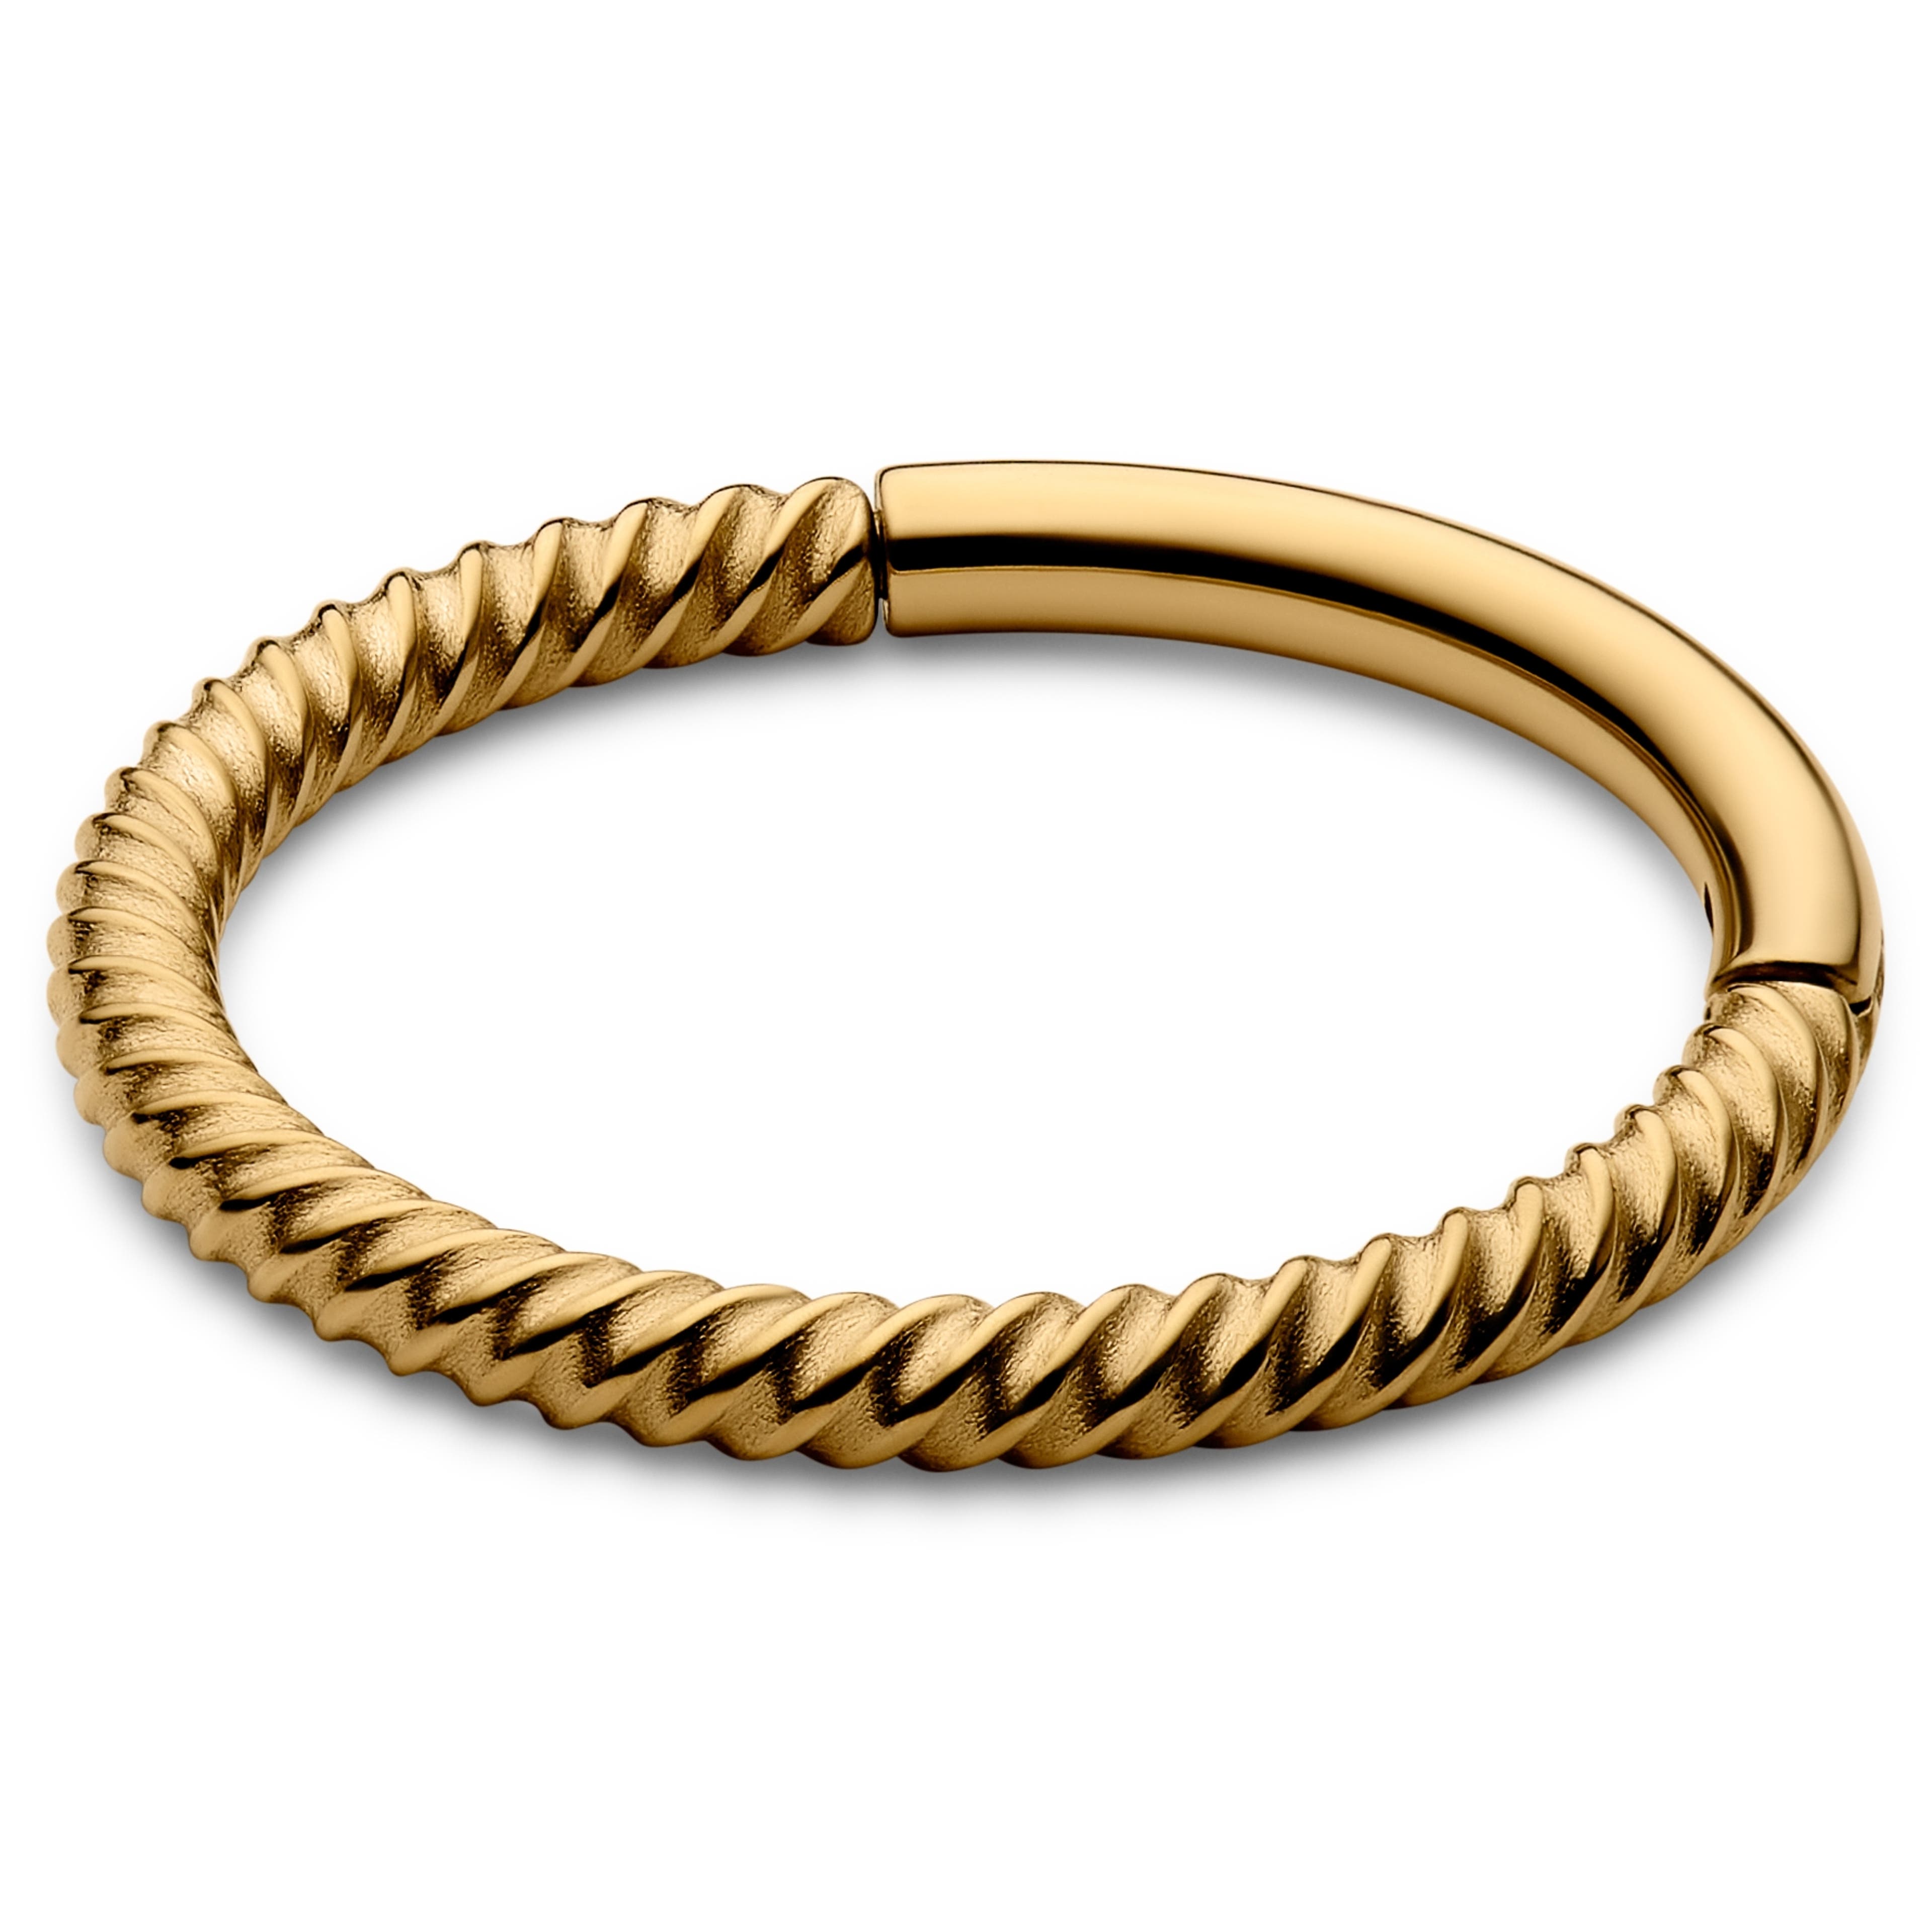 10 mm Gold-Tone Surgical Steel Wire Piercing Ring